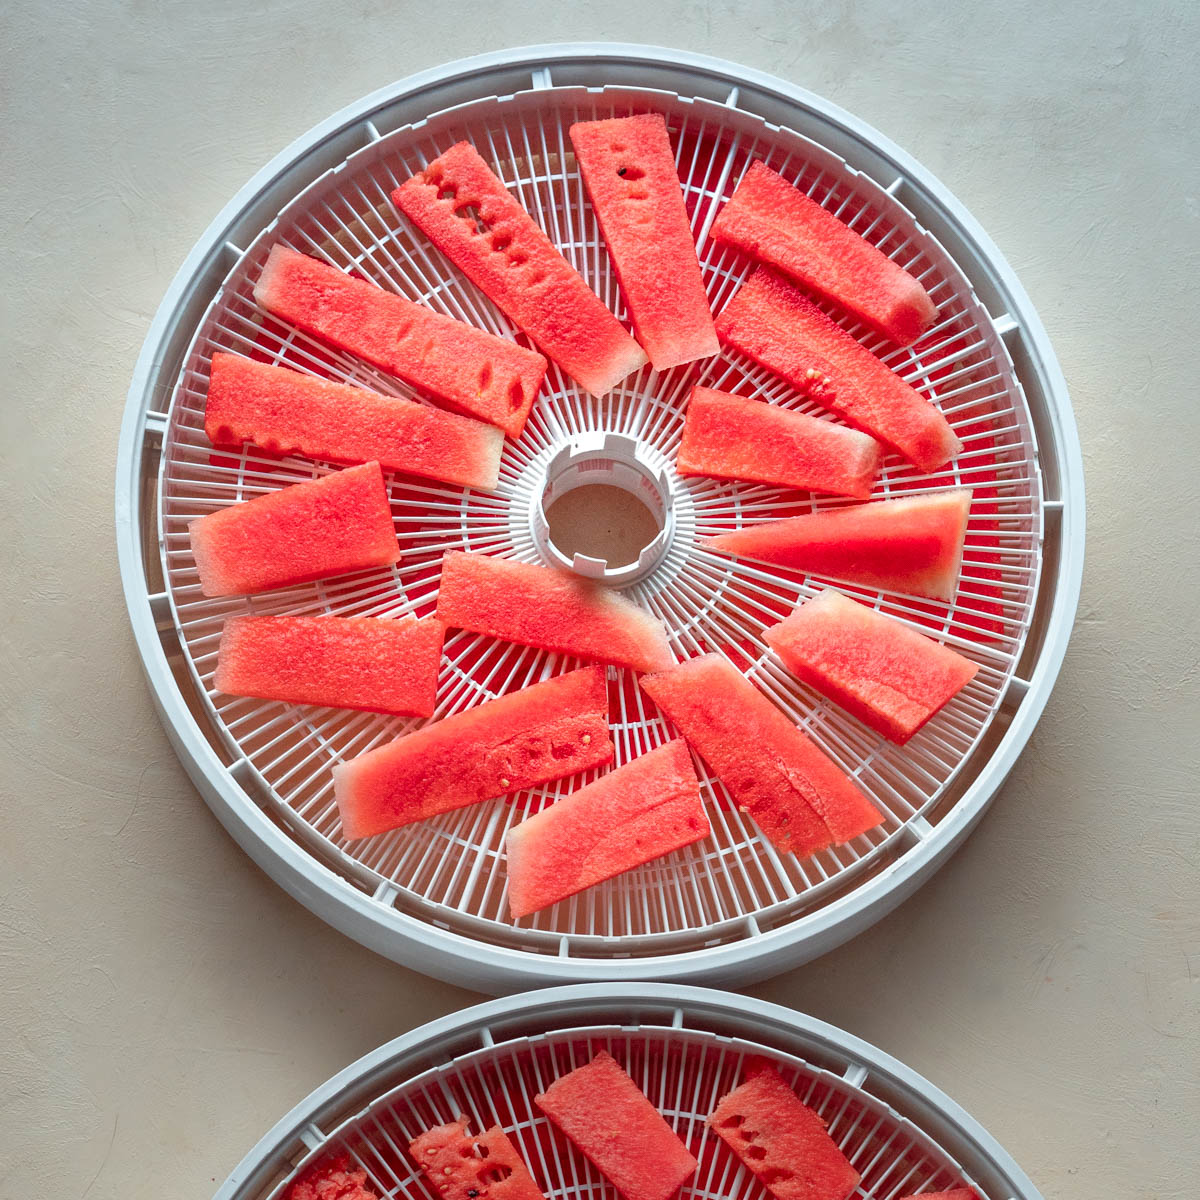 One tray of fresh watermelon about to be dehydrated